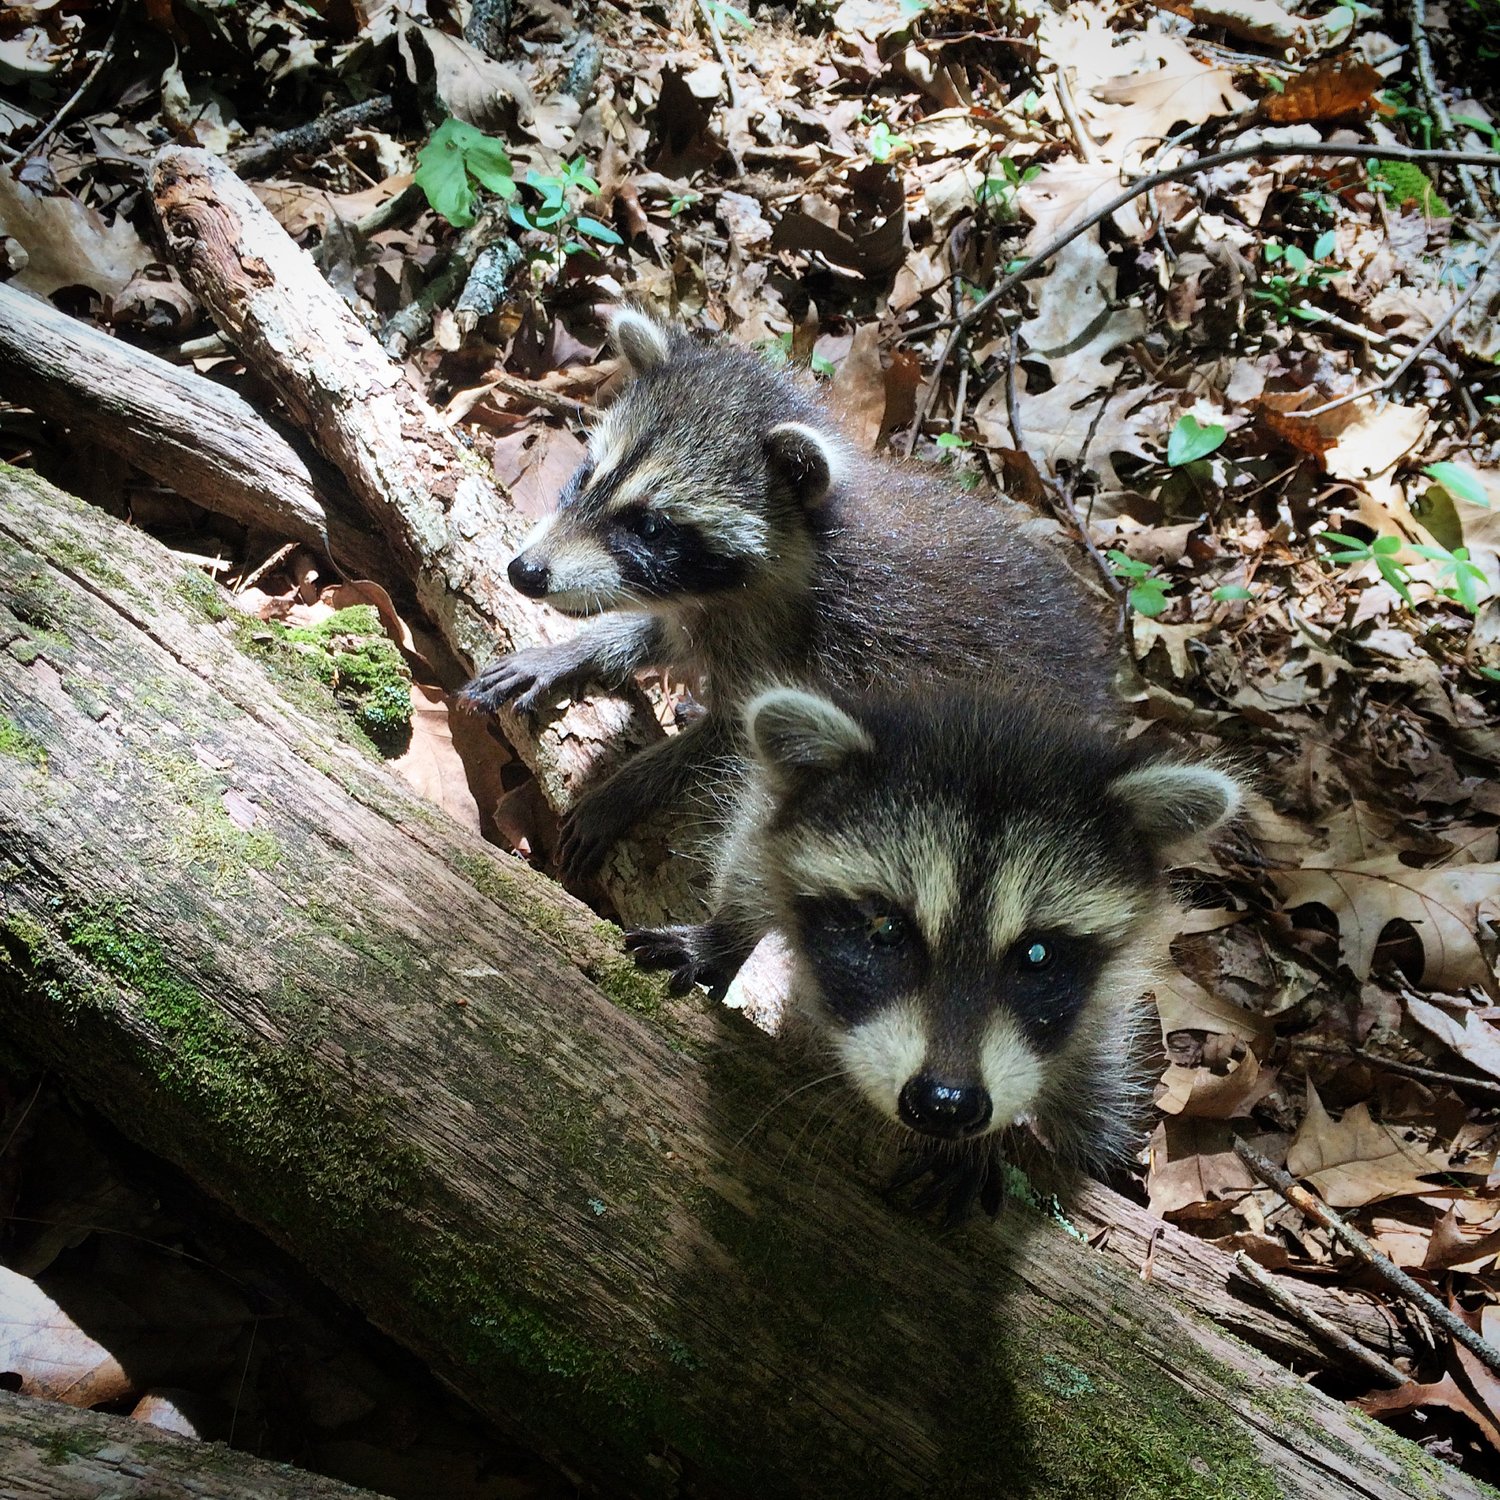 After their mother lost her life when hit by a vehicle, these baby raccoons made the trek to PWRC where staff stepped in to support them until they were strong enough to be released.